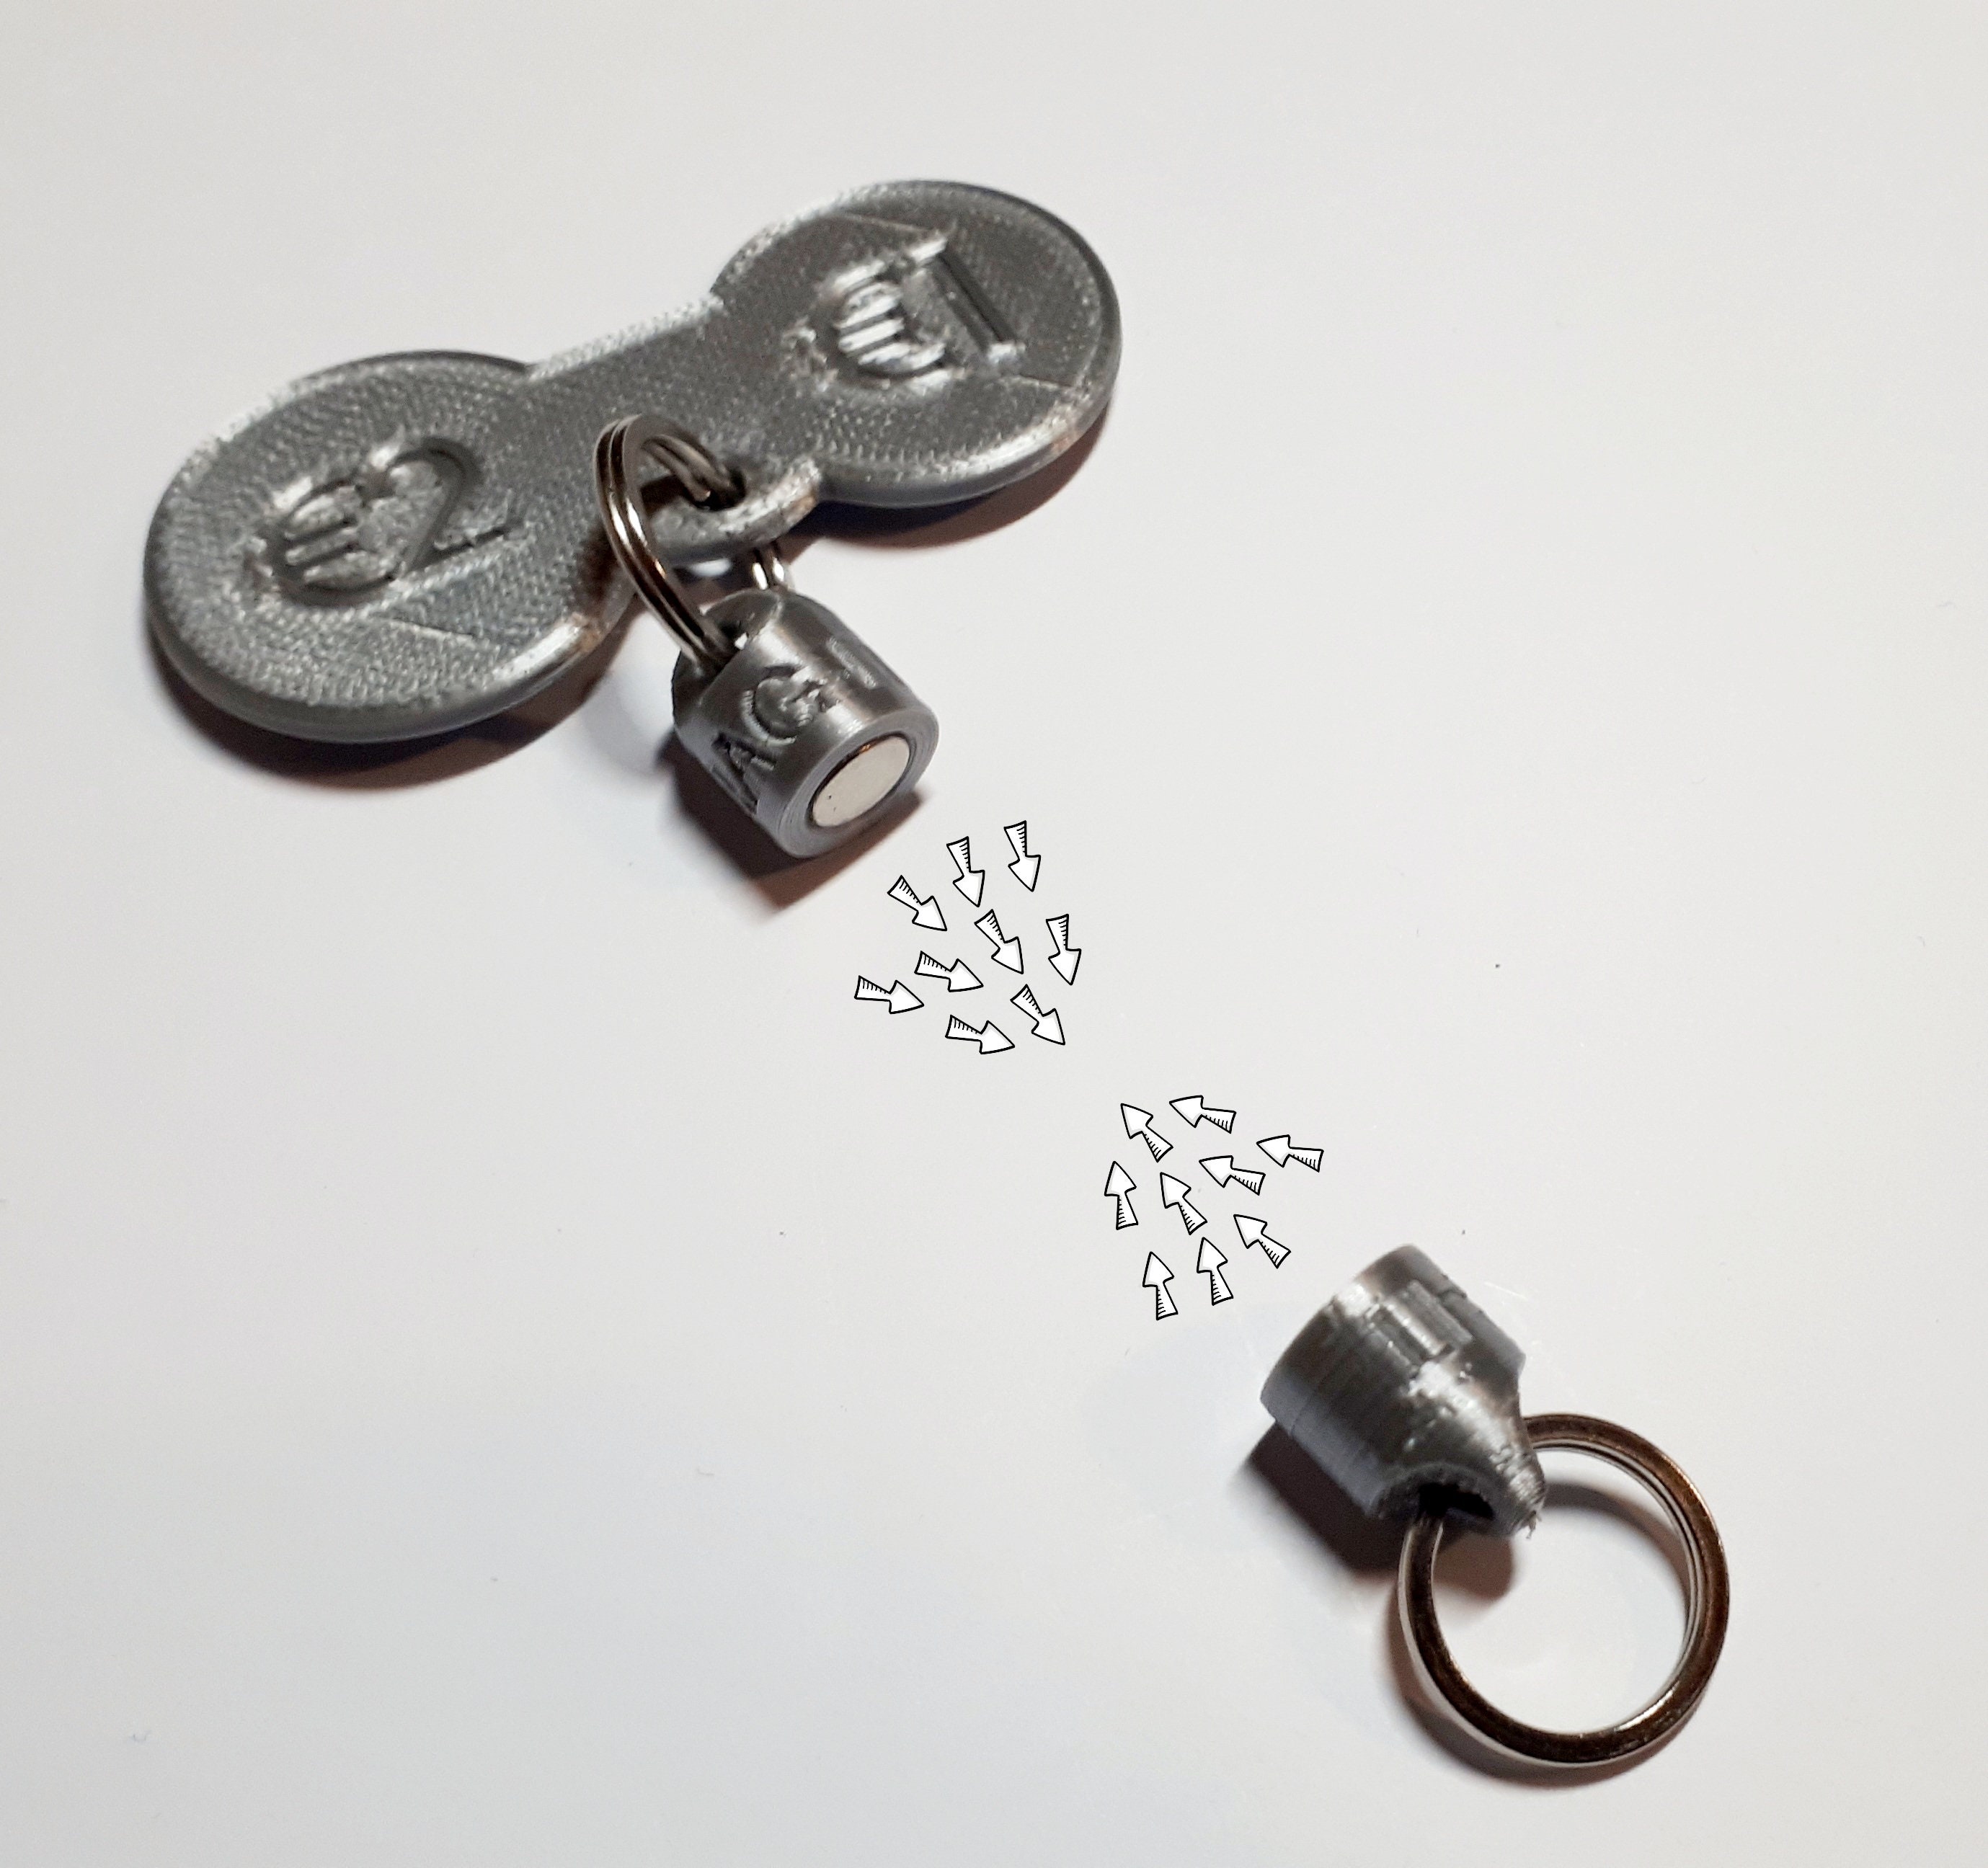 Mag Release - Quick Release Keychain